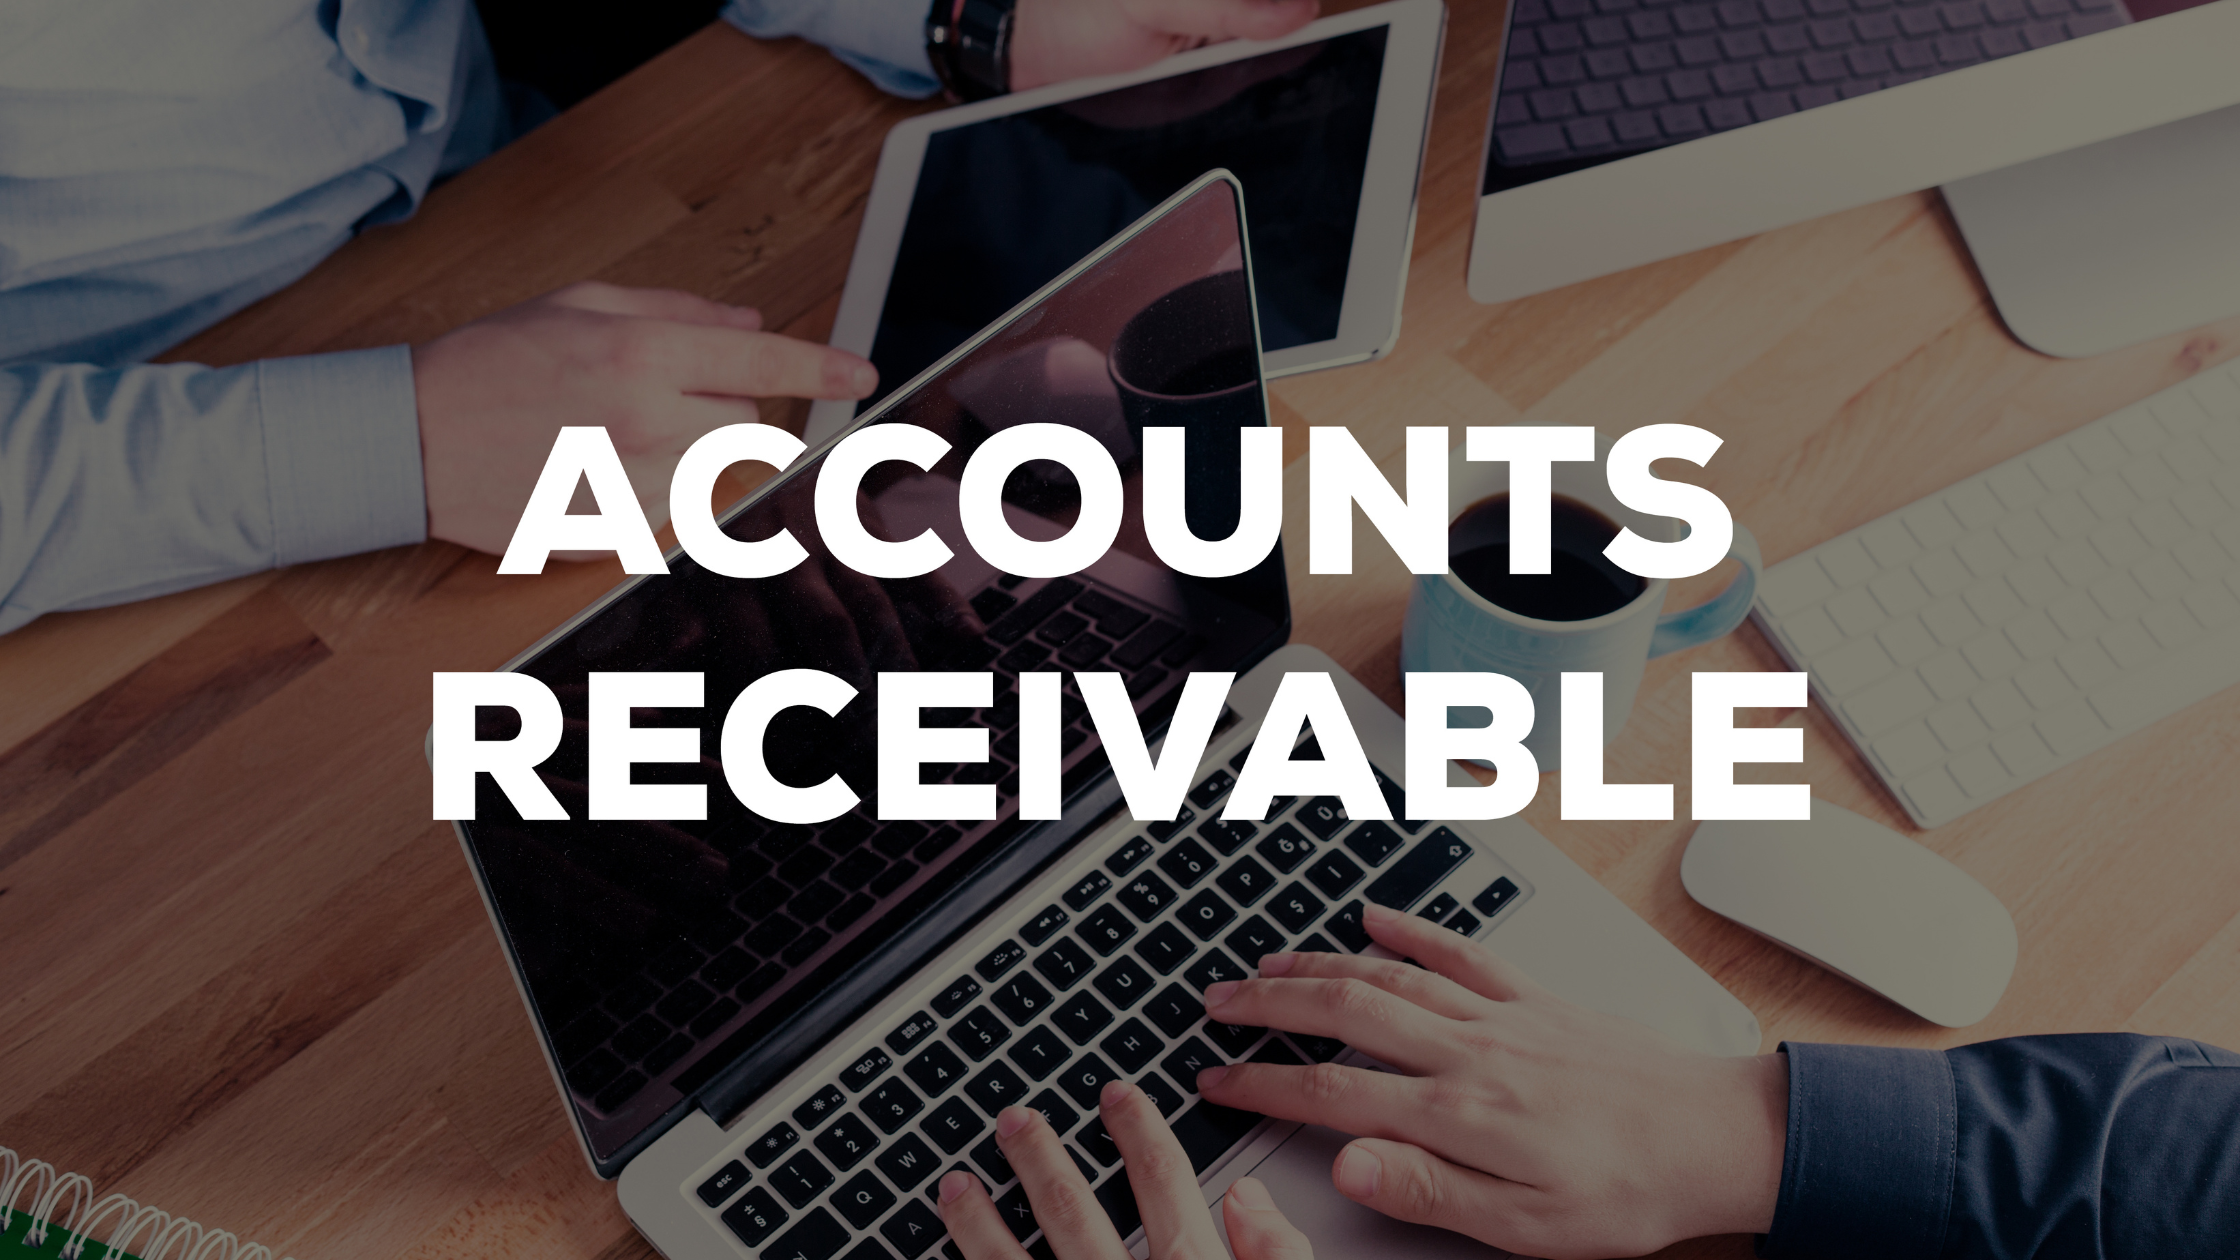 What is the Accounts Receivable Process?